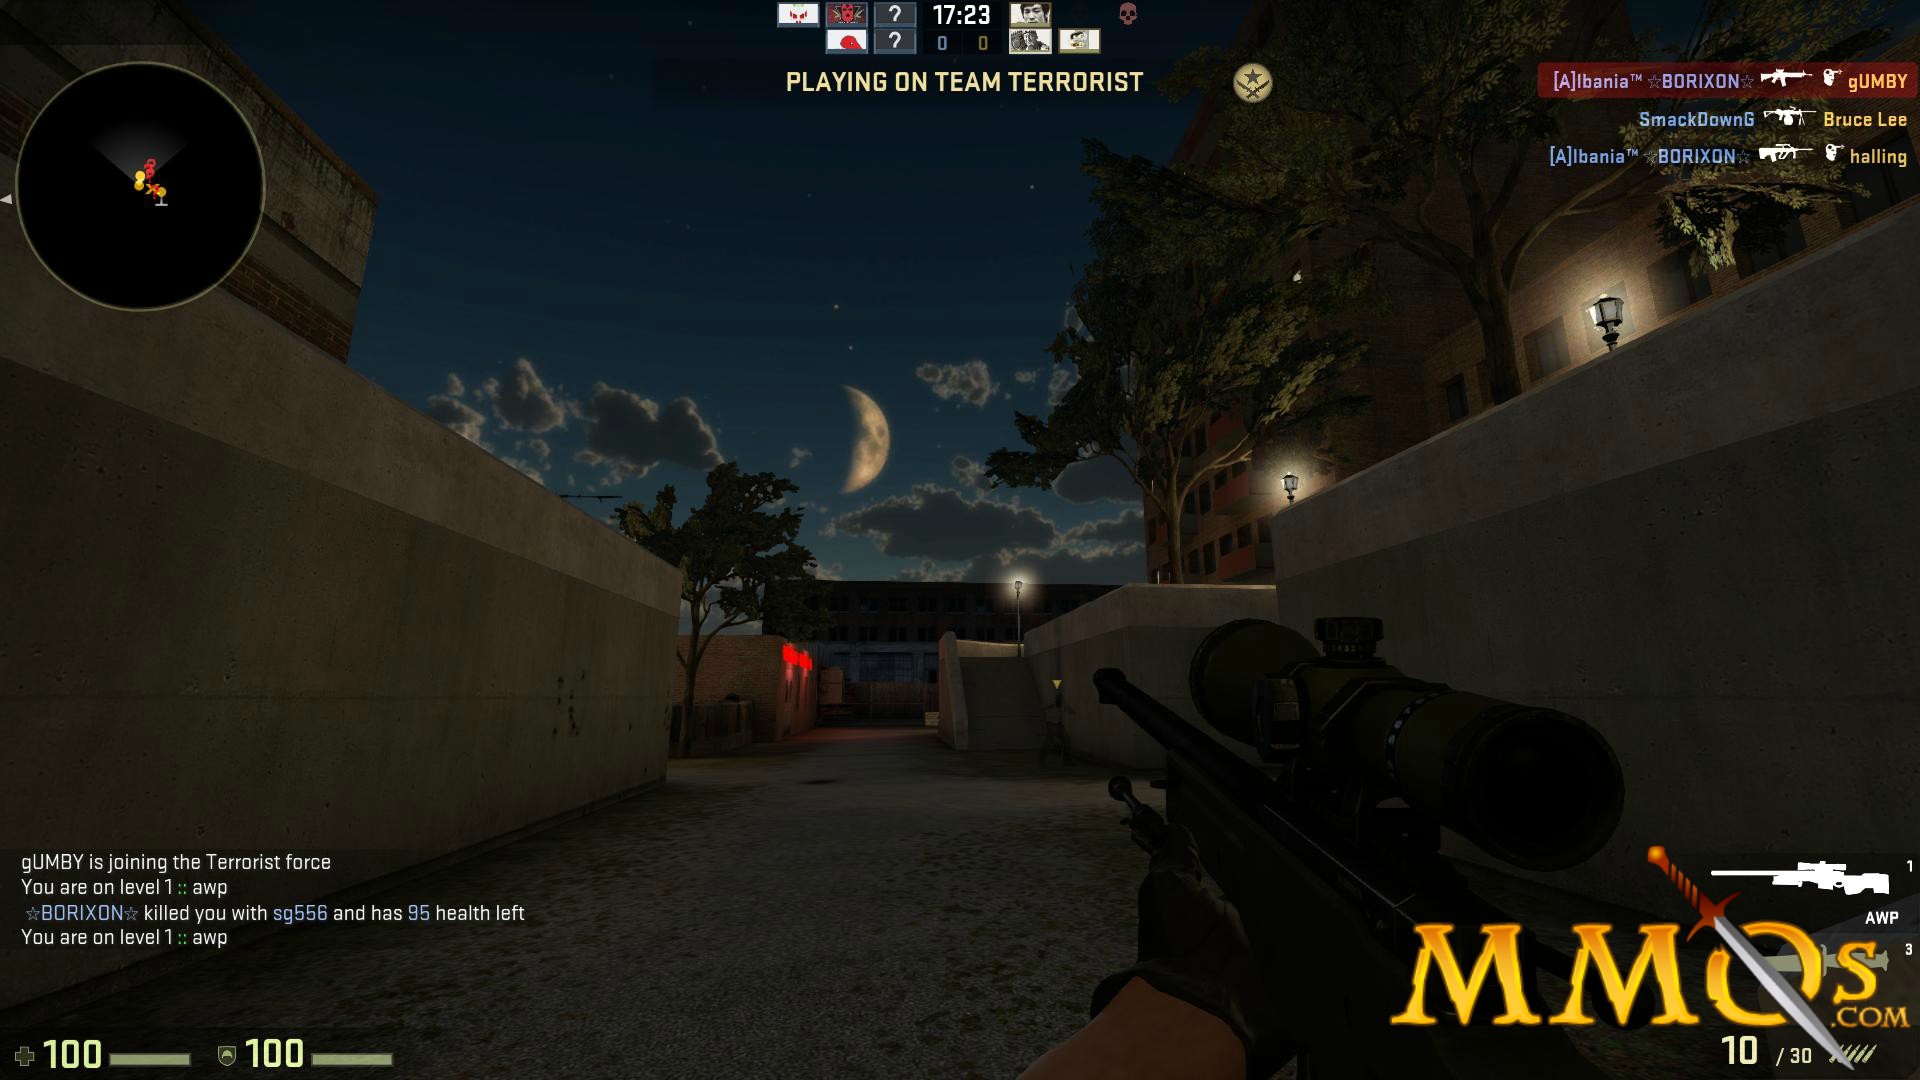 Counter-Strike: Global Offensive' Gets A Release Date And Price